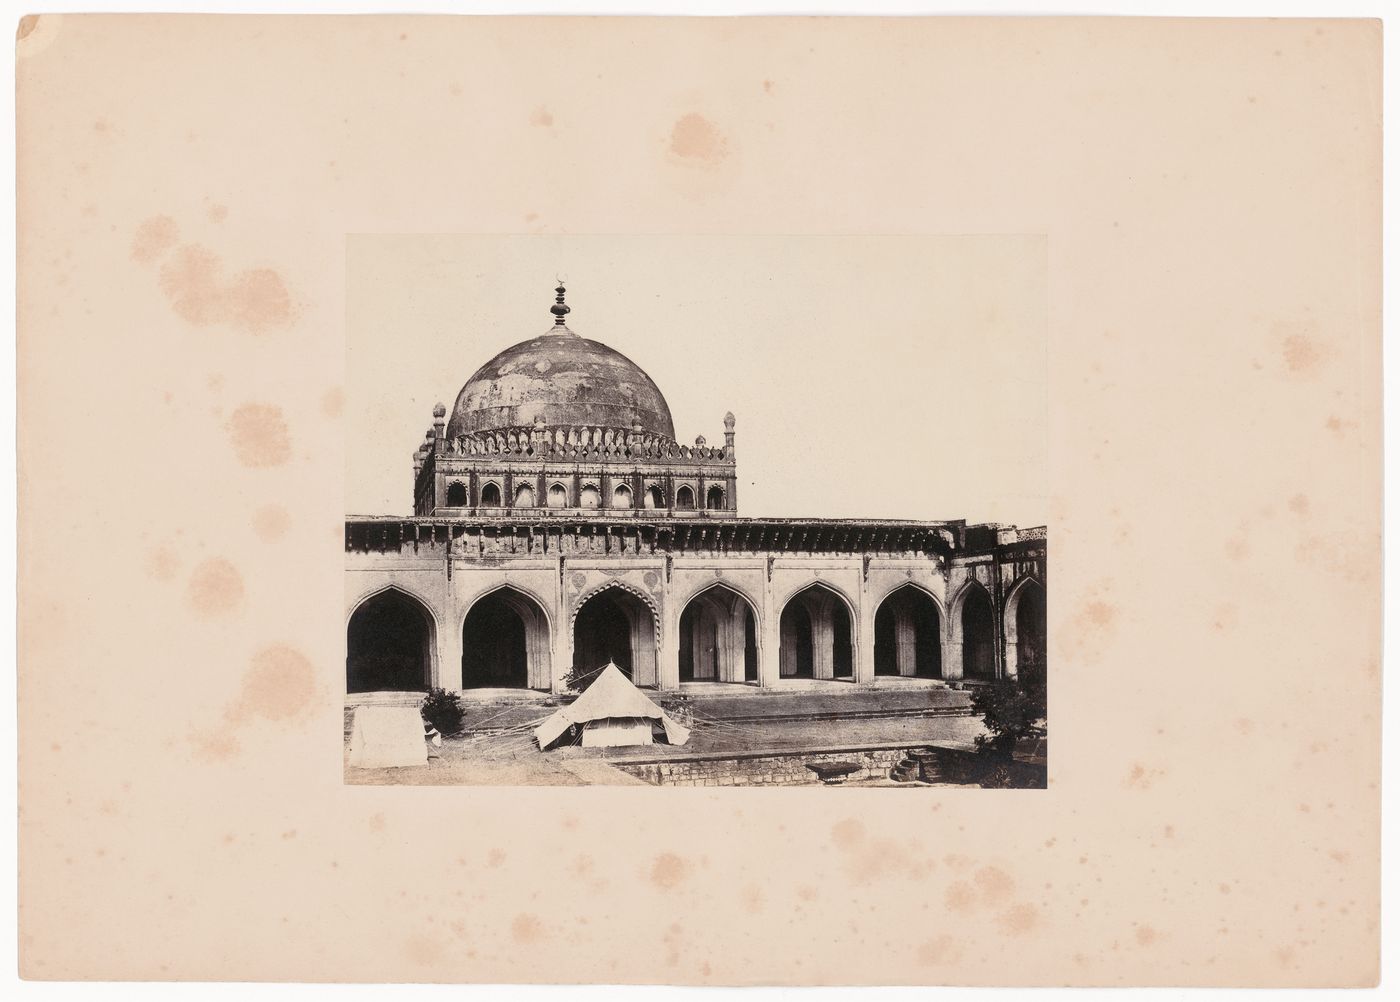 View of the Jami Masjid from within the courtyard, Beejapore (now Bijapur), India